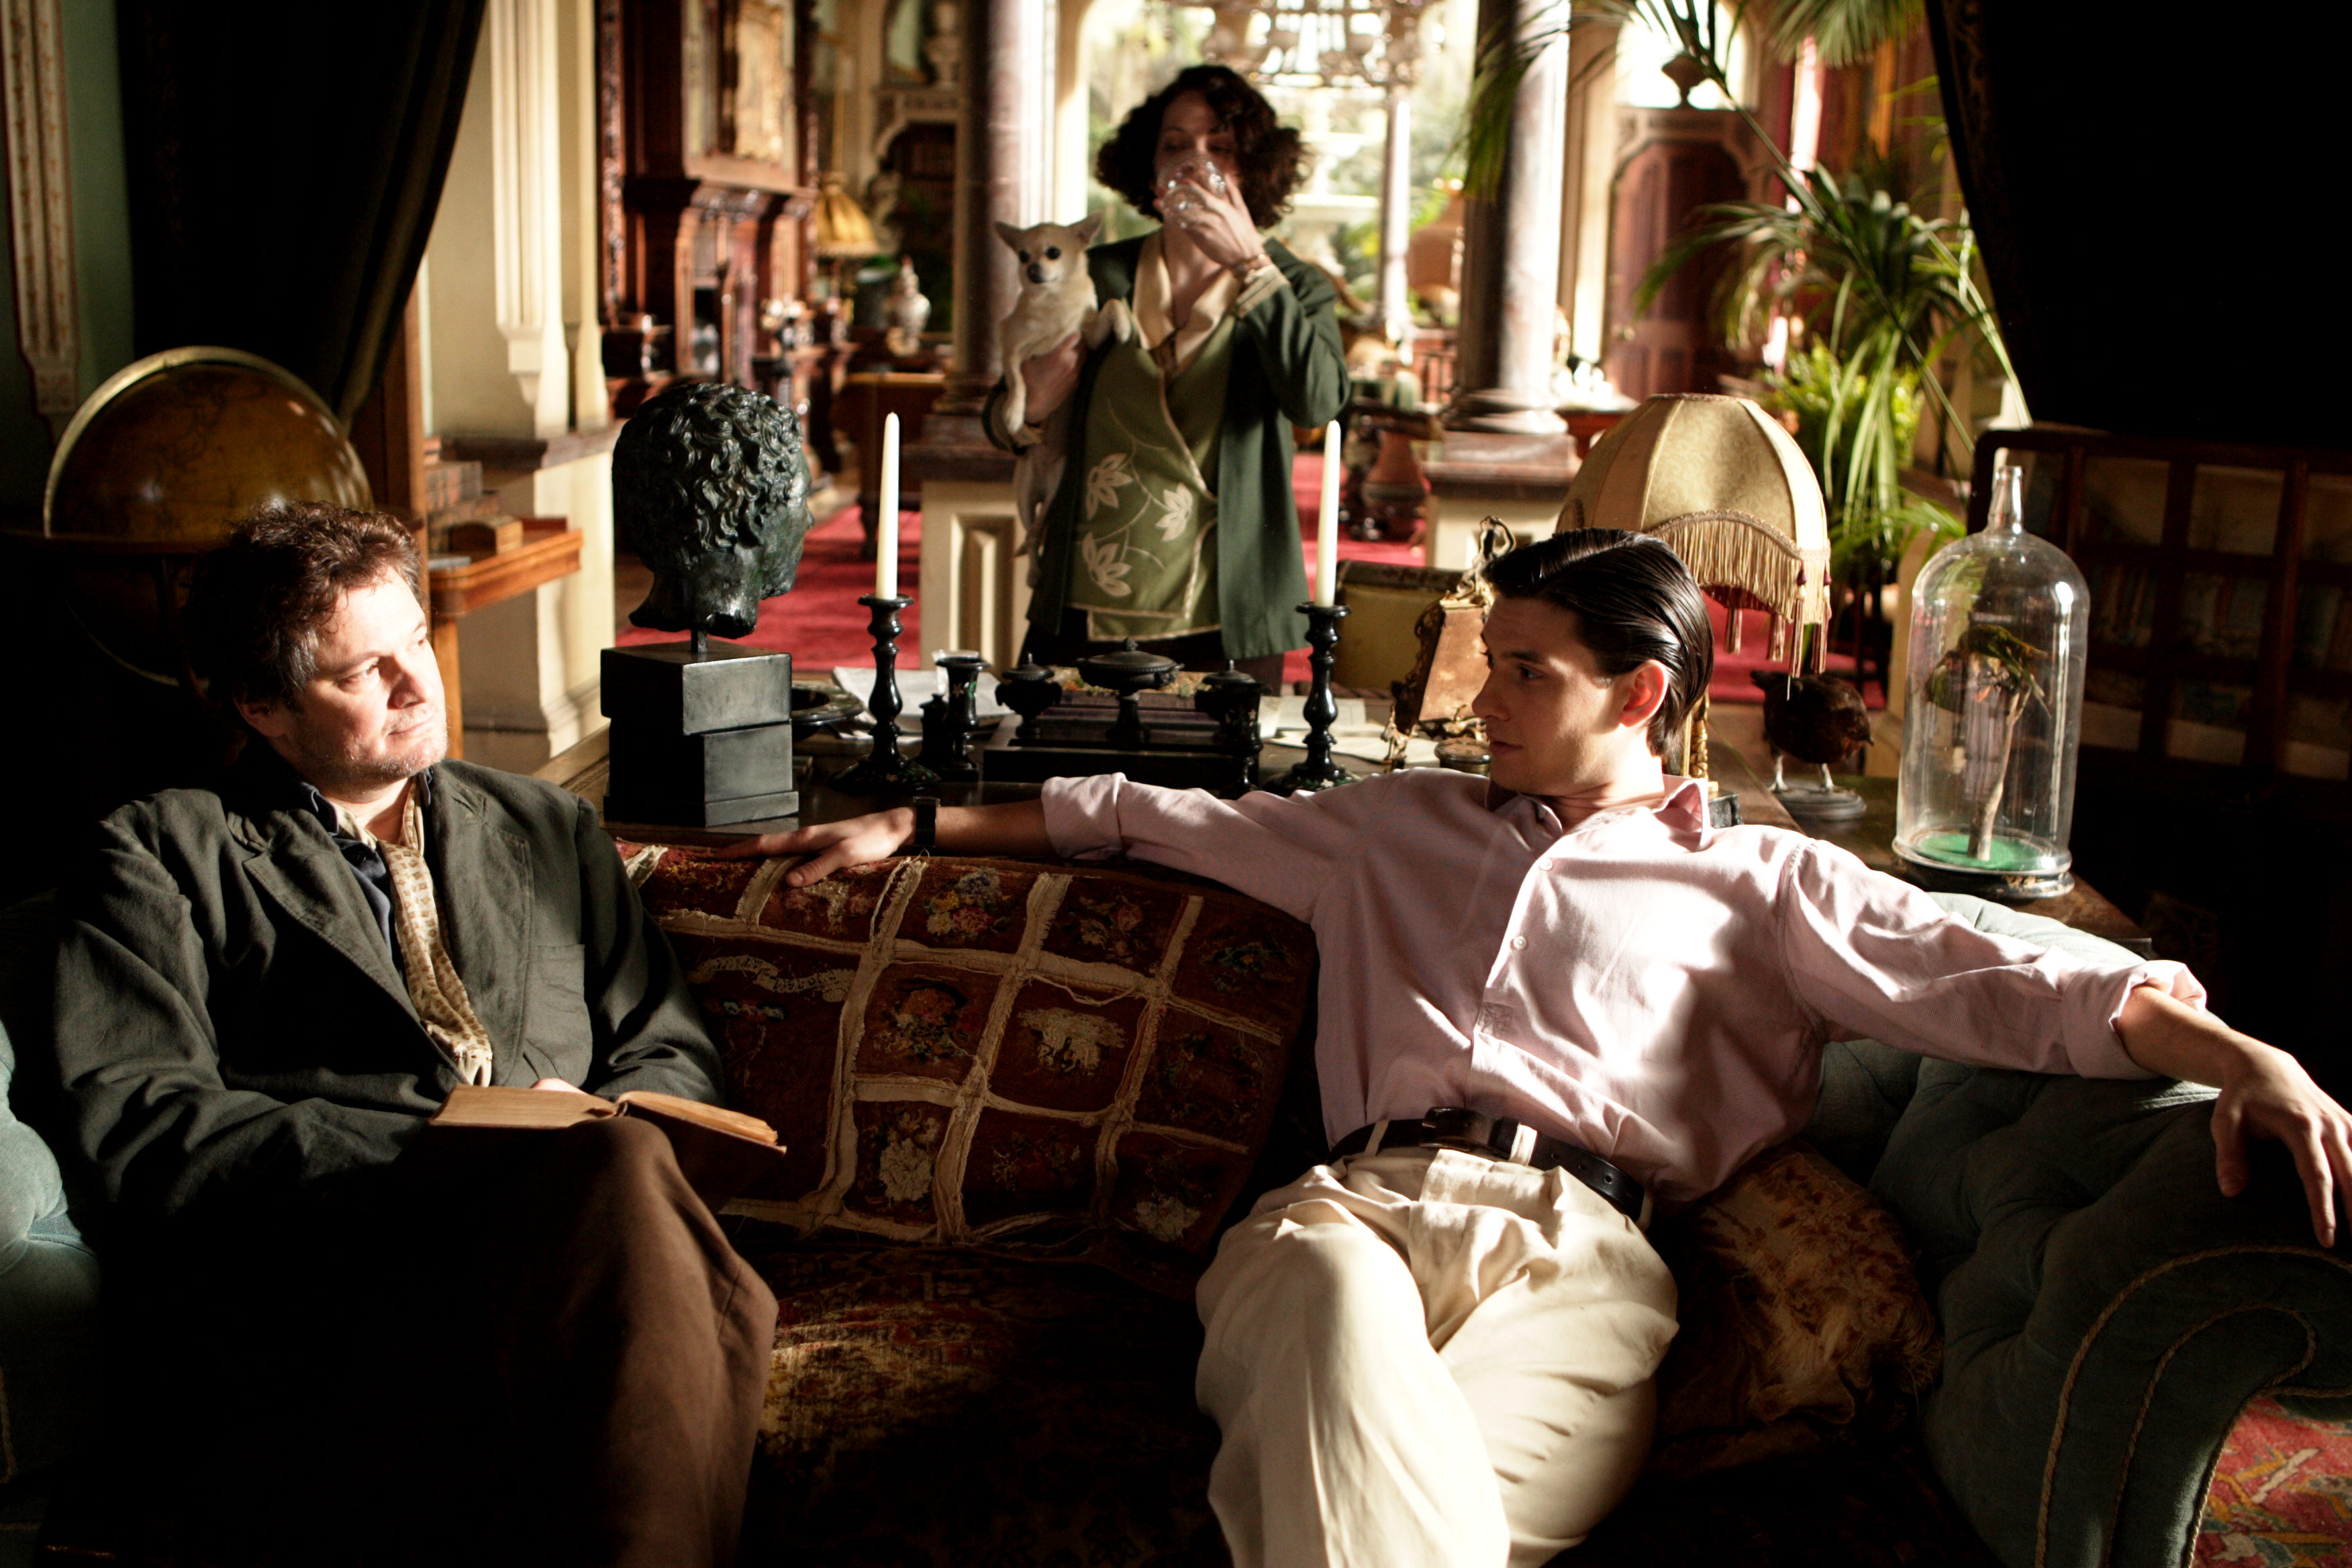 Colin Firth, Katherine Parkinson and Ben Barnes in Ealing Studios' Easy Virtue (2009)